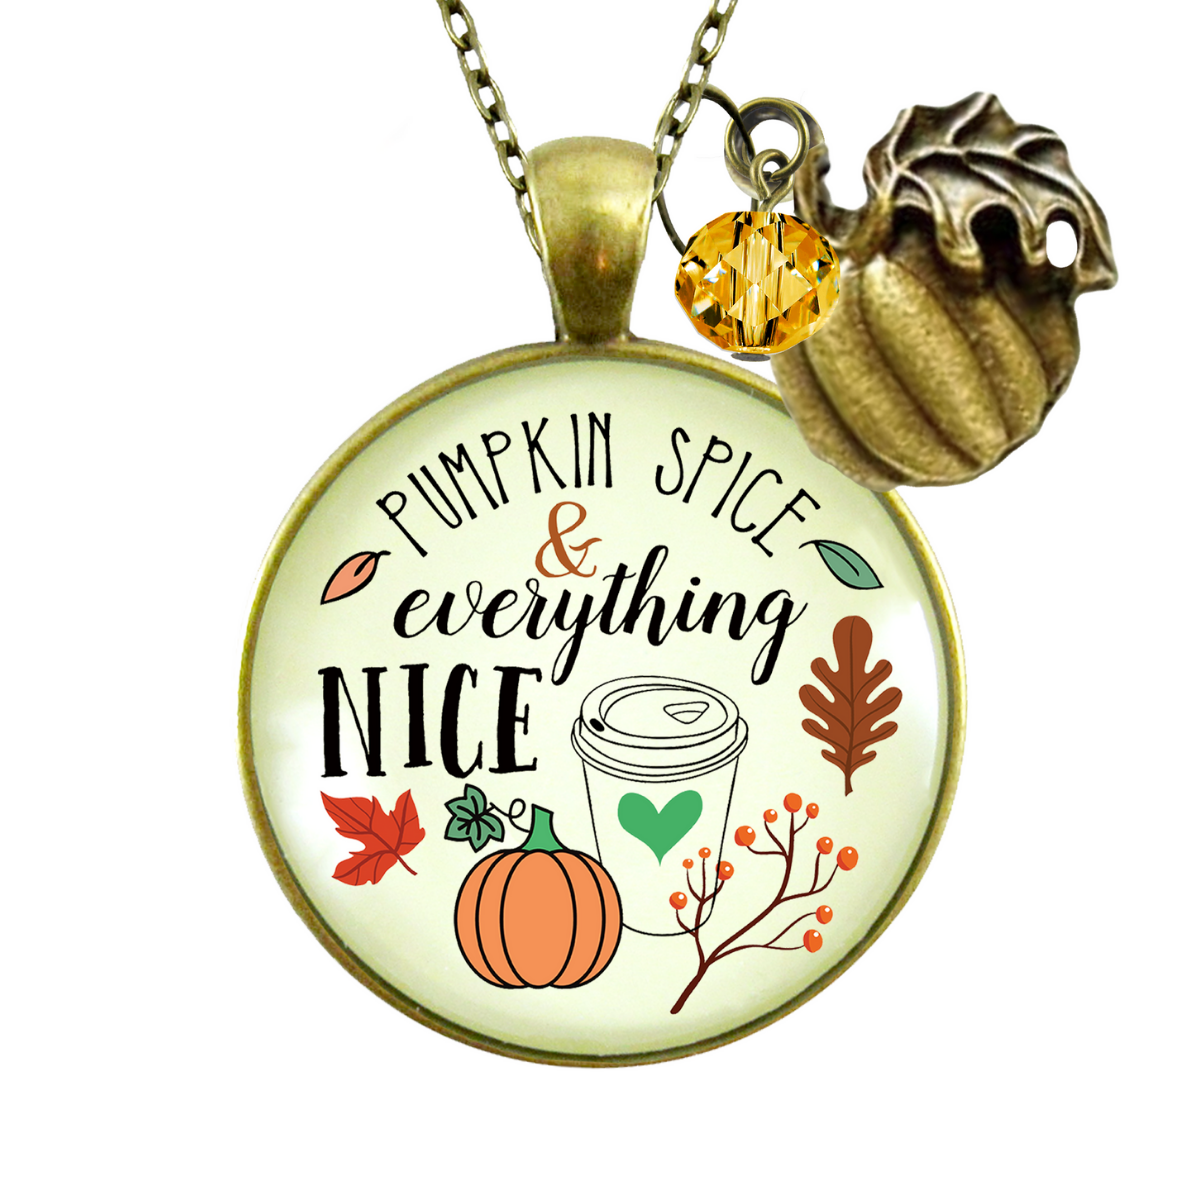 Gutsy Goodness Pumpkin Spice Necklace October Autumn Latte Theme Charm Jewelry - Gutsy Goodness Handmade Jewelry;Pumpkin Spice Necklace October Autumn Latte Theme Charm Jewelry - Gutsy Goodness Handmade Jewelry Gifts